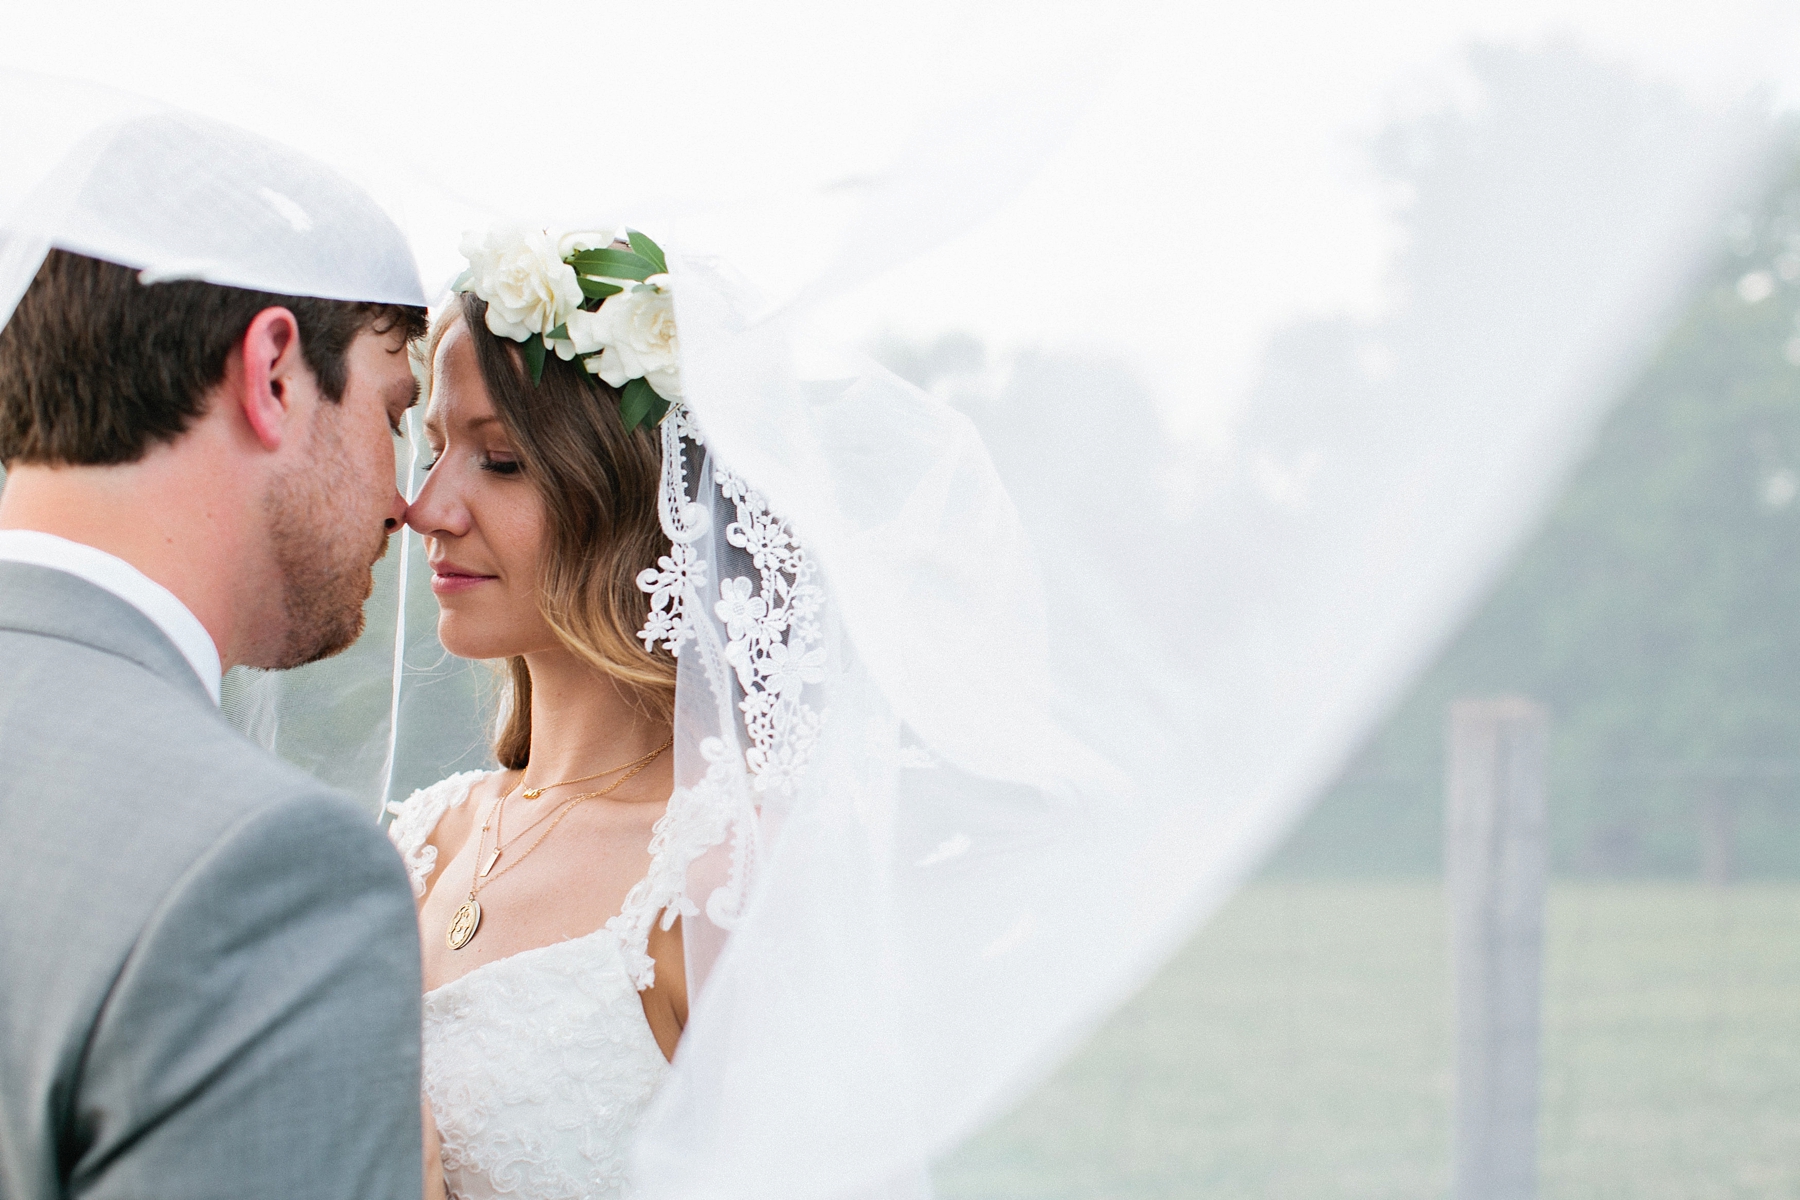 Bride and groom intimate portrait by Elle Danielle Photography